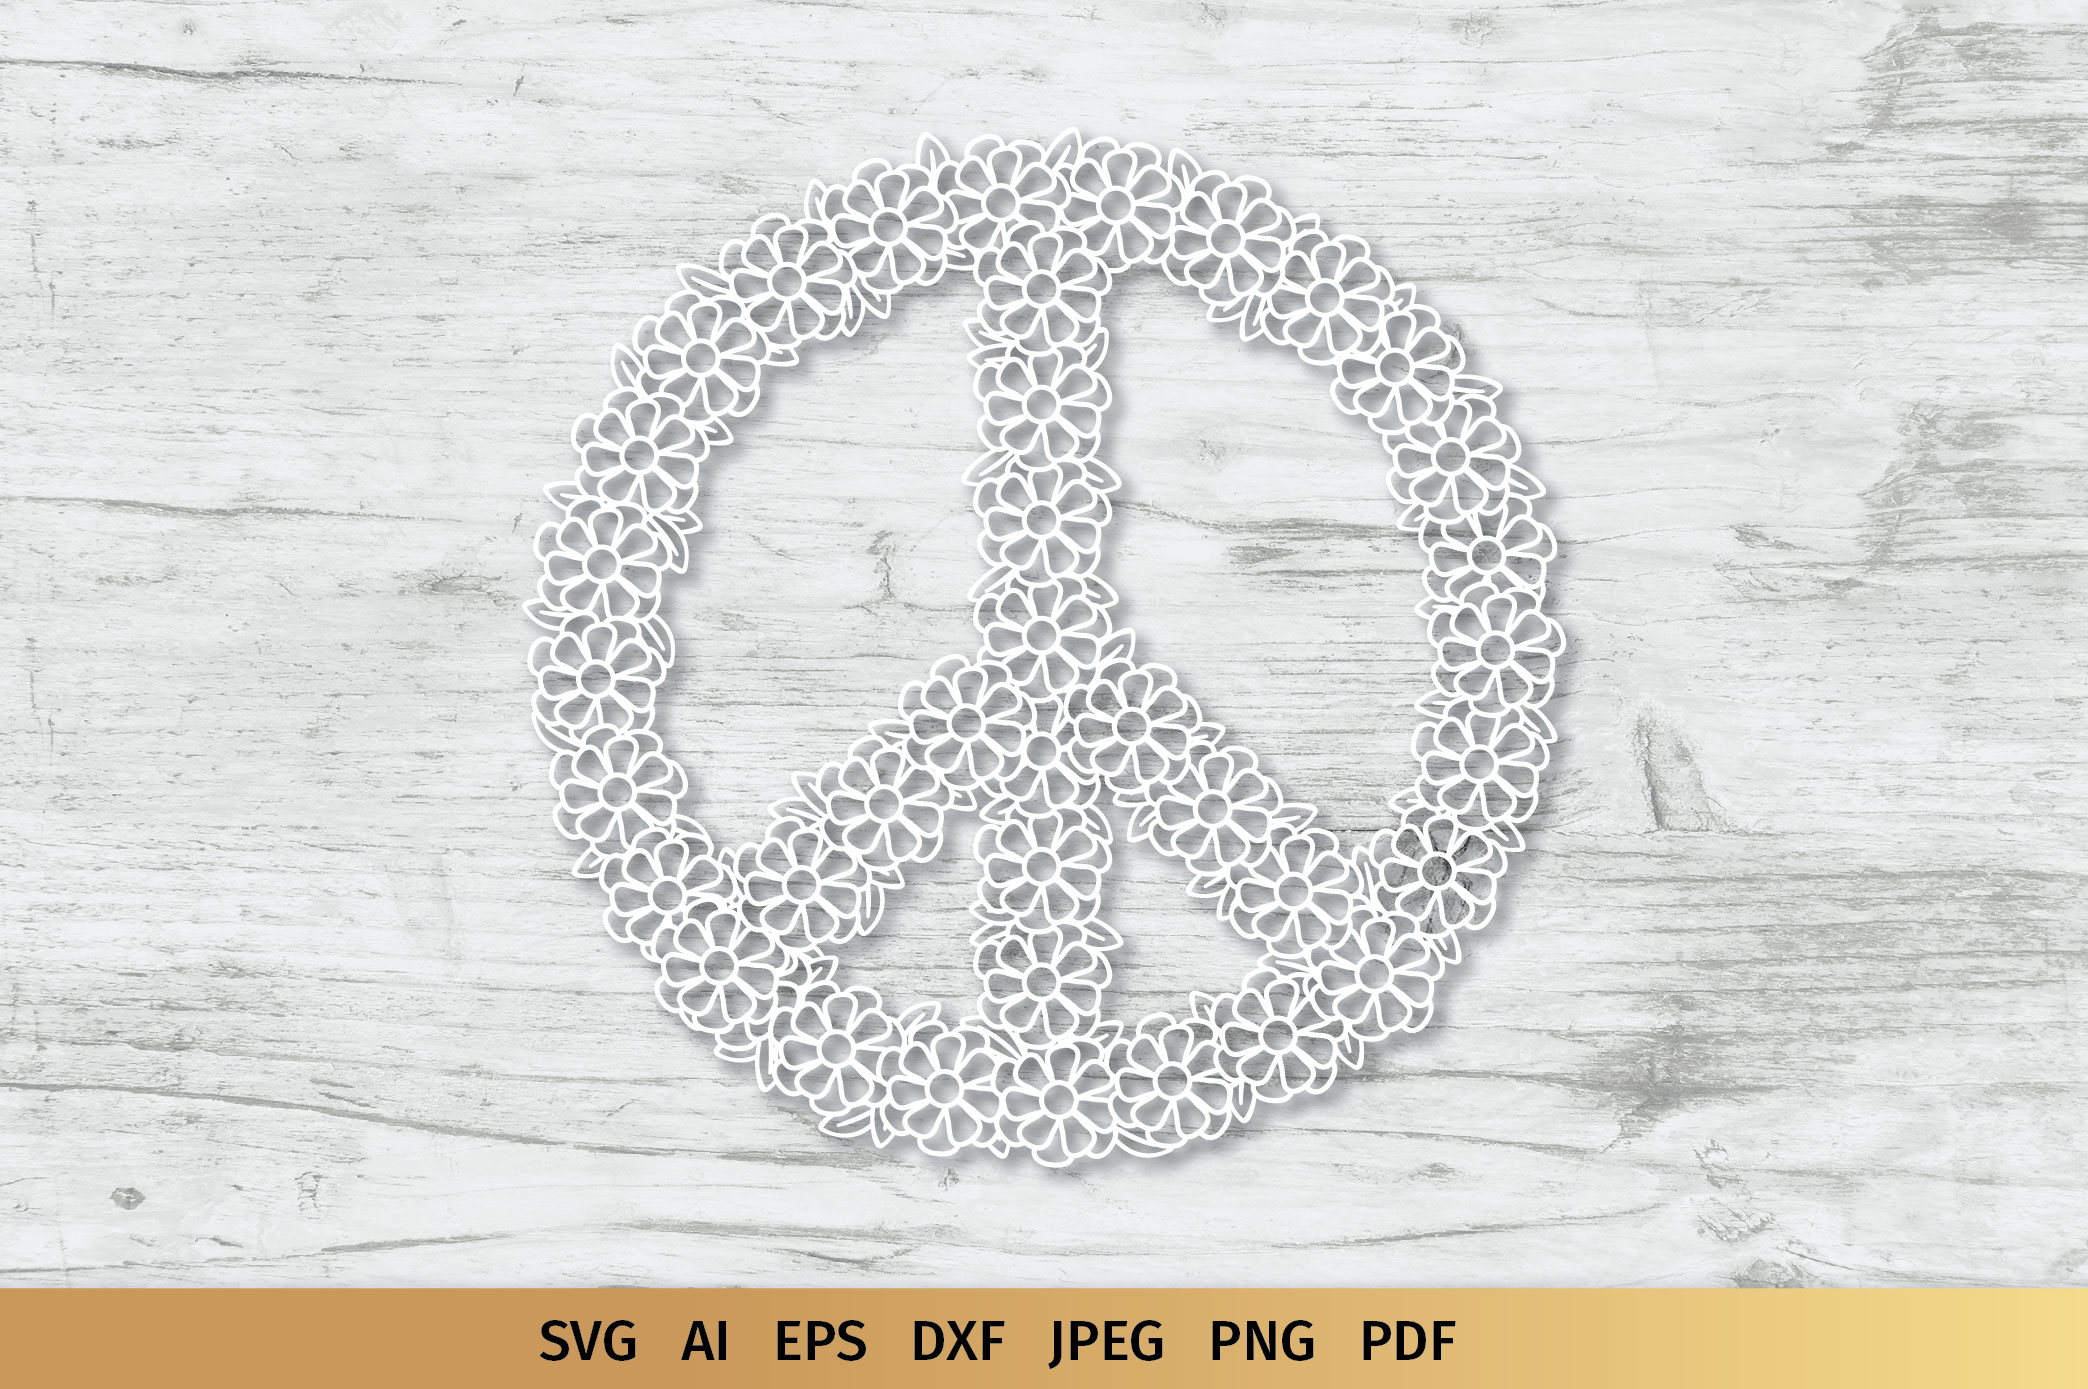 Peace Sign Flowers SVG